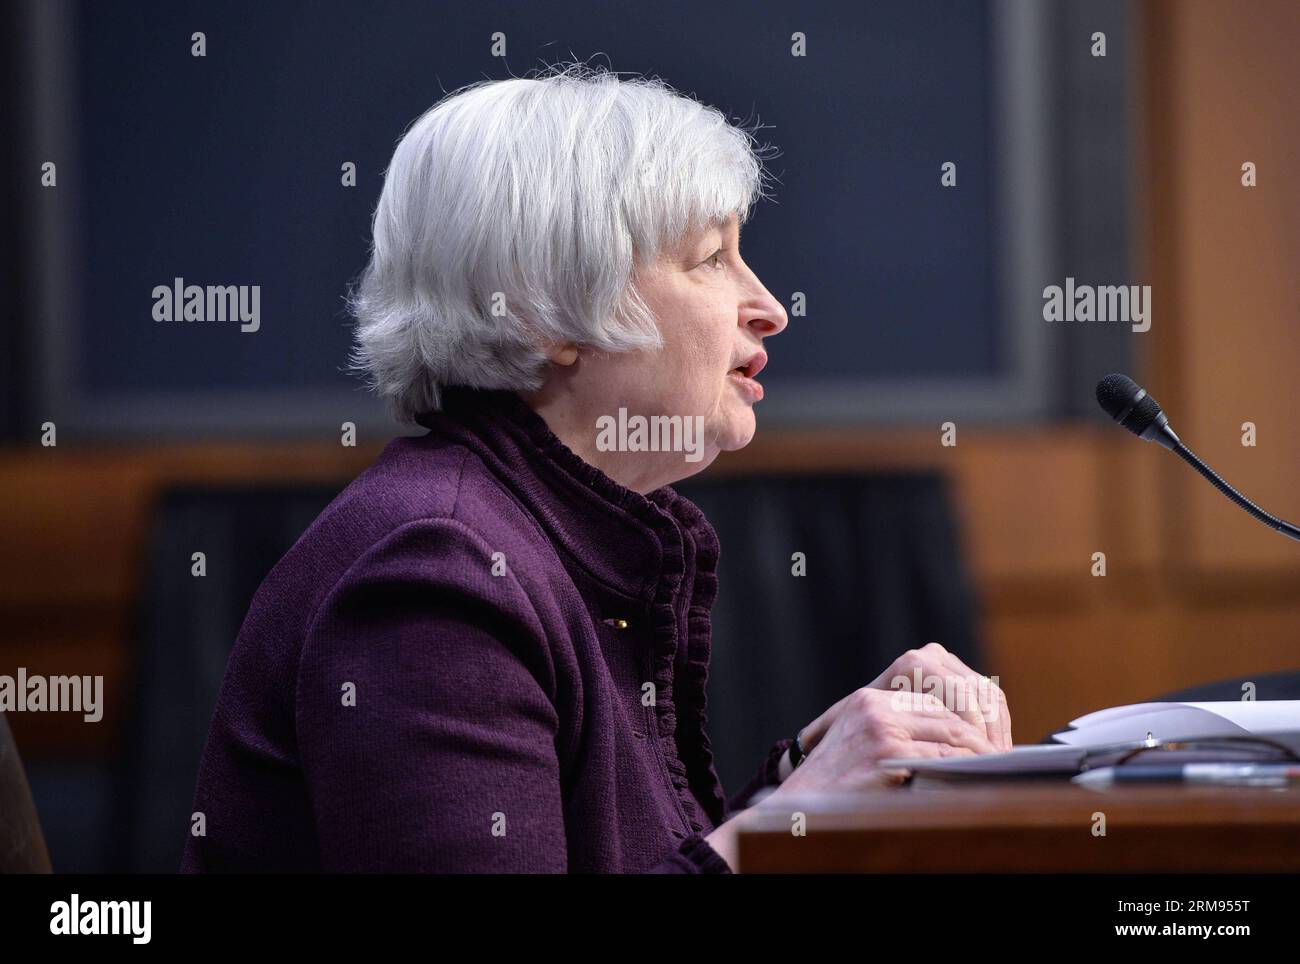 U.S. Federal Reserve Chair Janet Yellen testifies before the Joint Economic Committee of U.S. Congress during a hearing on Capitol Hill in Washington D.C., capital of the United States, May 7, 2014. Yellen told Congress on Wednesday that she expected the economic growth to accelerate this year despite an anemic first quarter but the cooling trend in housing sector would be a fresh concern. (Xinhua/Bao Dandan) (zw) U.S.-WASHINGTON-YELLEN-HEARING PUBLICATIONxNOTxINxCHN   U S Federal Reserve Chair Janet Yellen testifies Before The Joint Economic Committee of U S Congress during a Hearing ON Capit Stock Photo